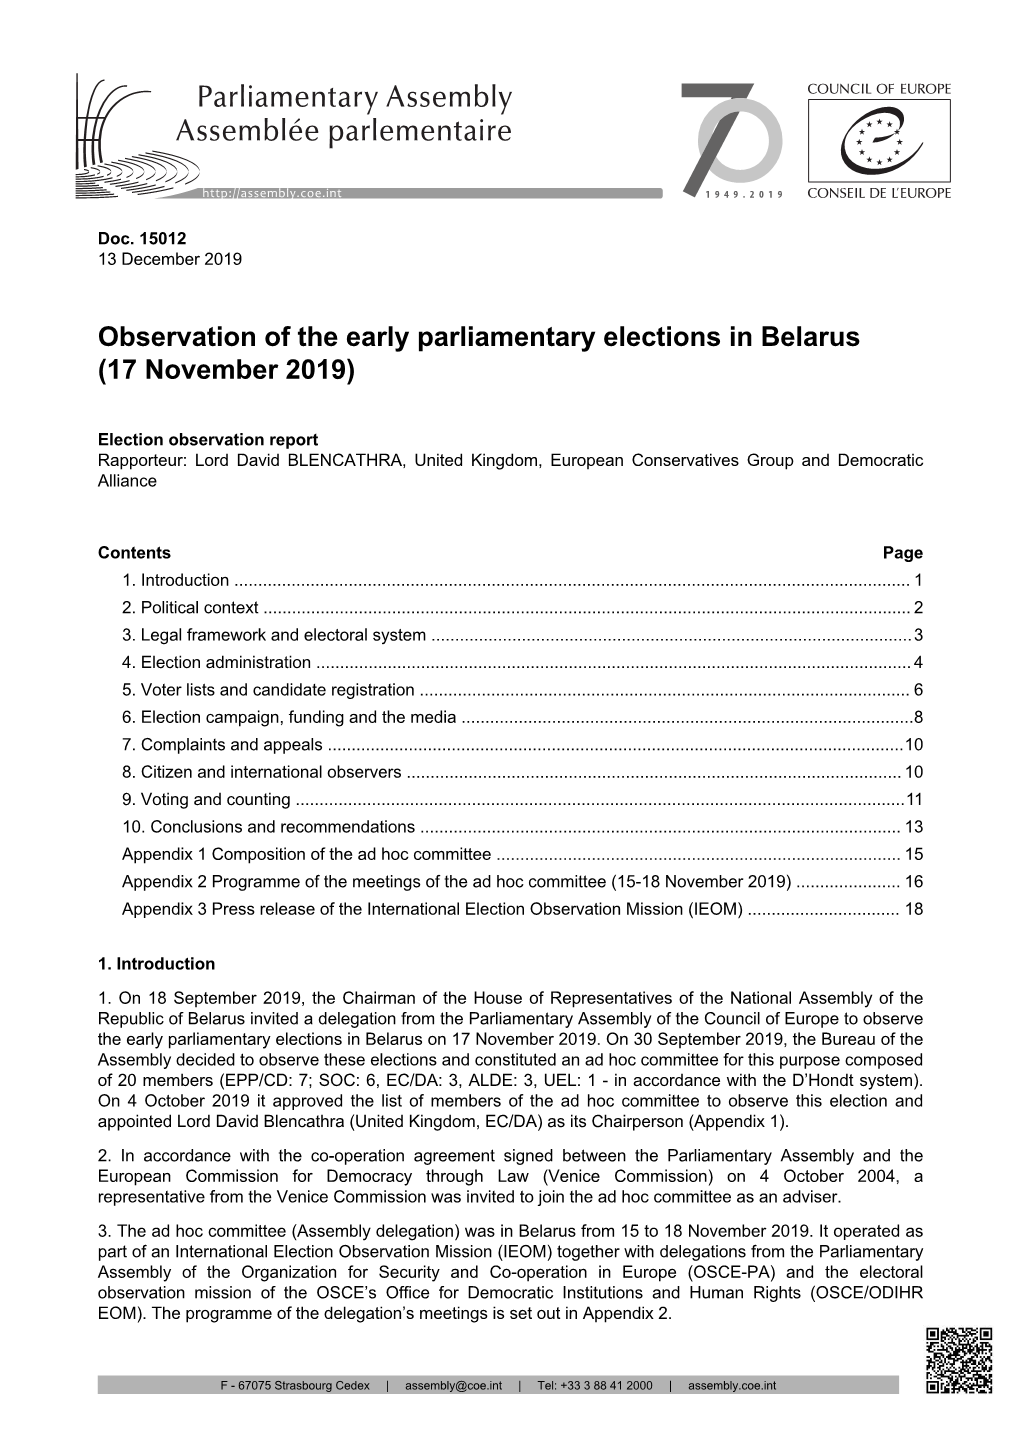 Observation of the Early Parliamentary Elections in Belarus (17 November 2019)